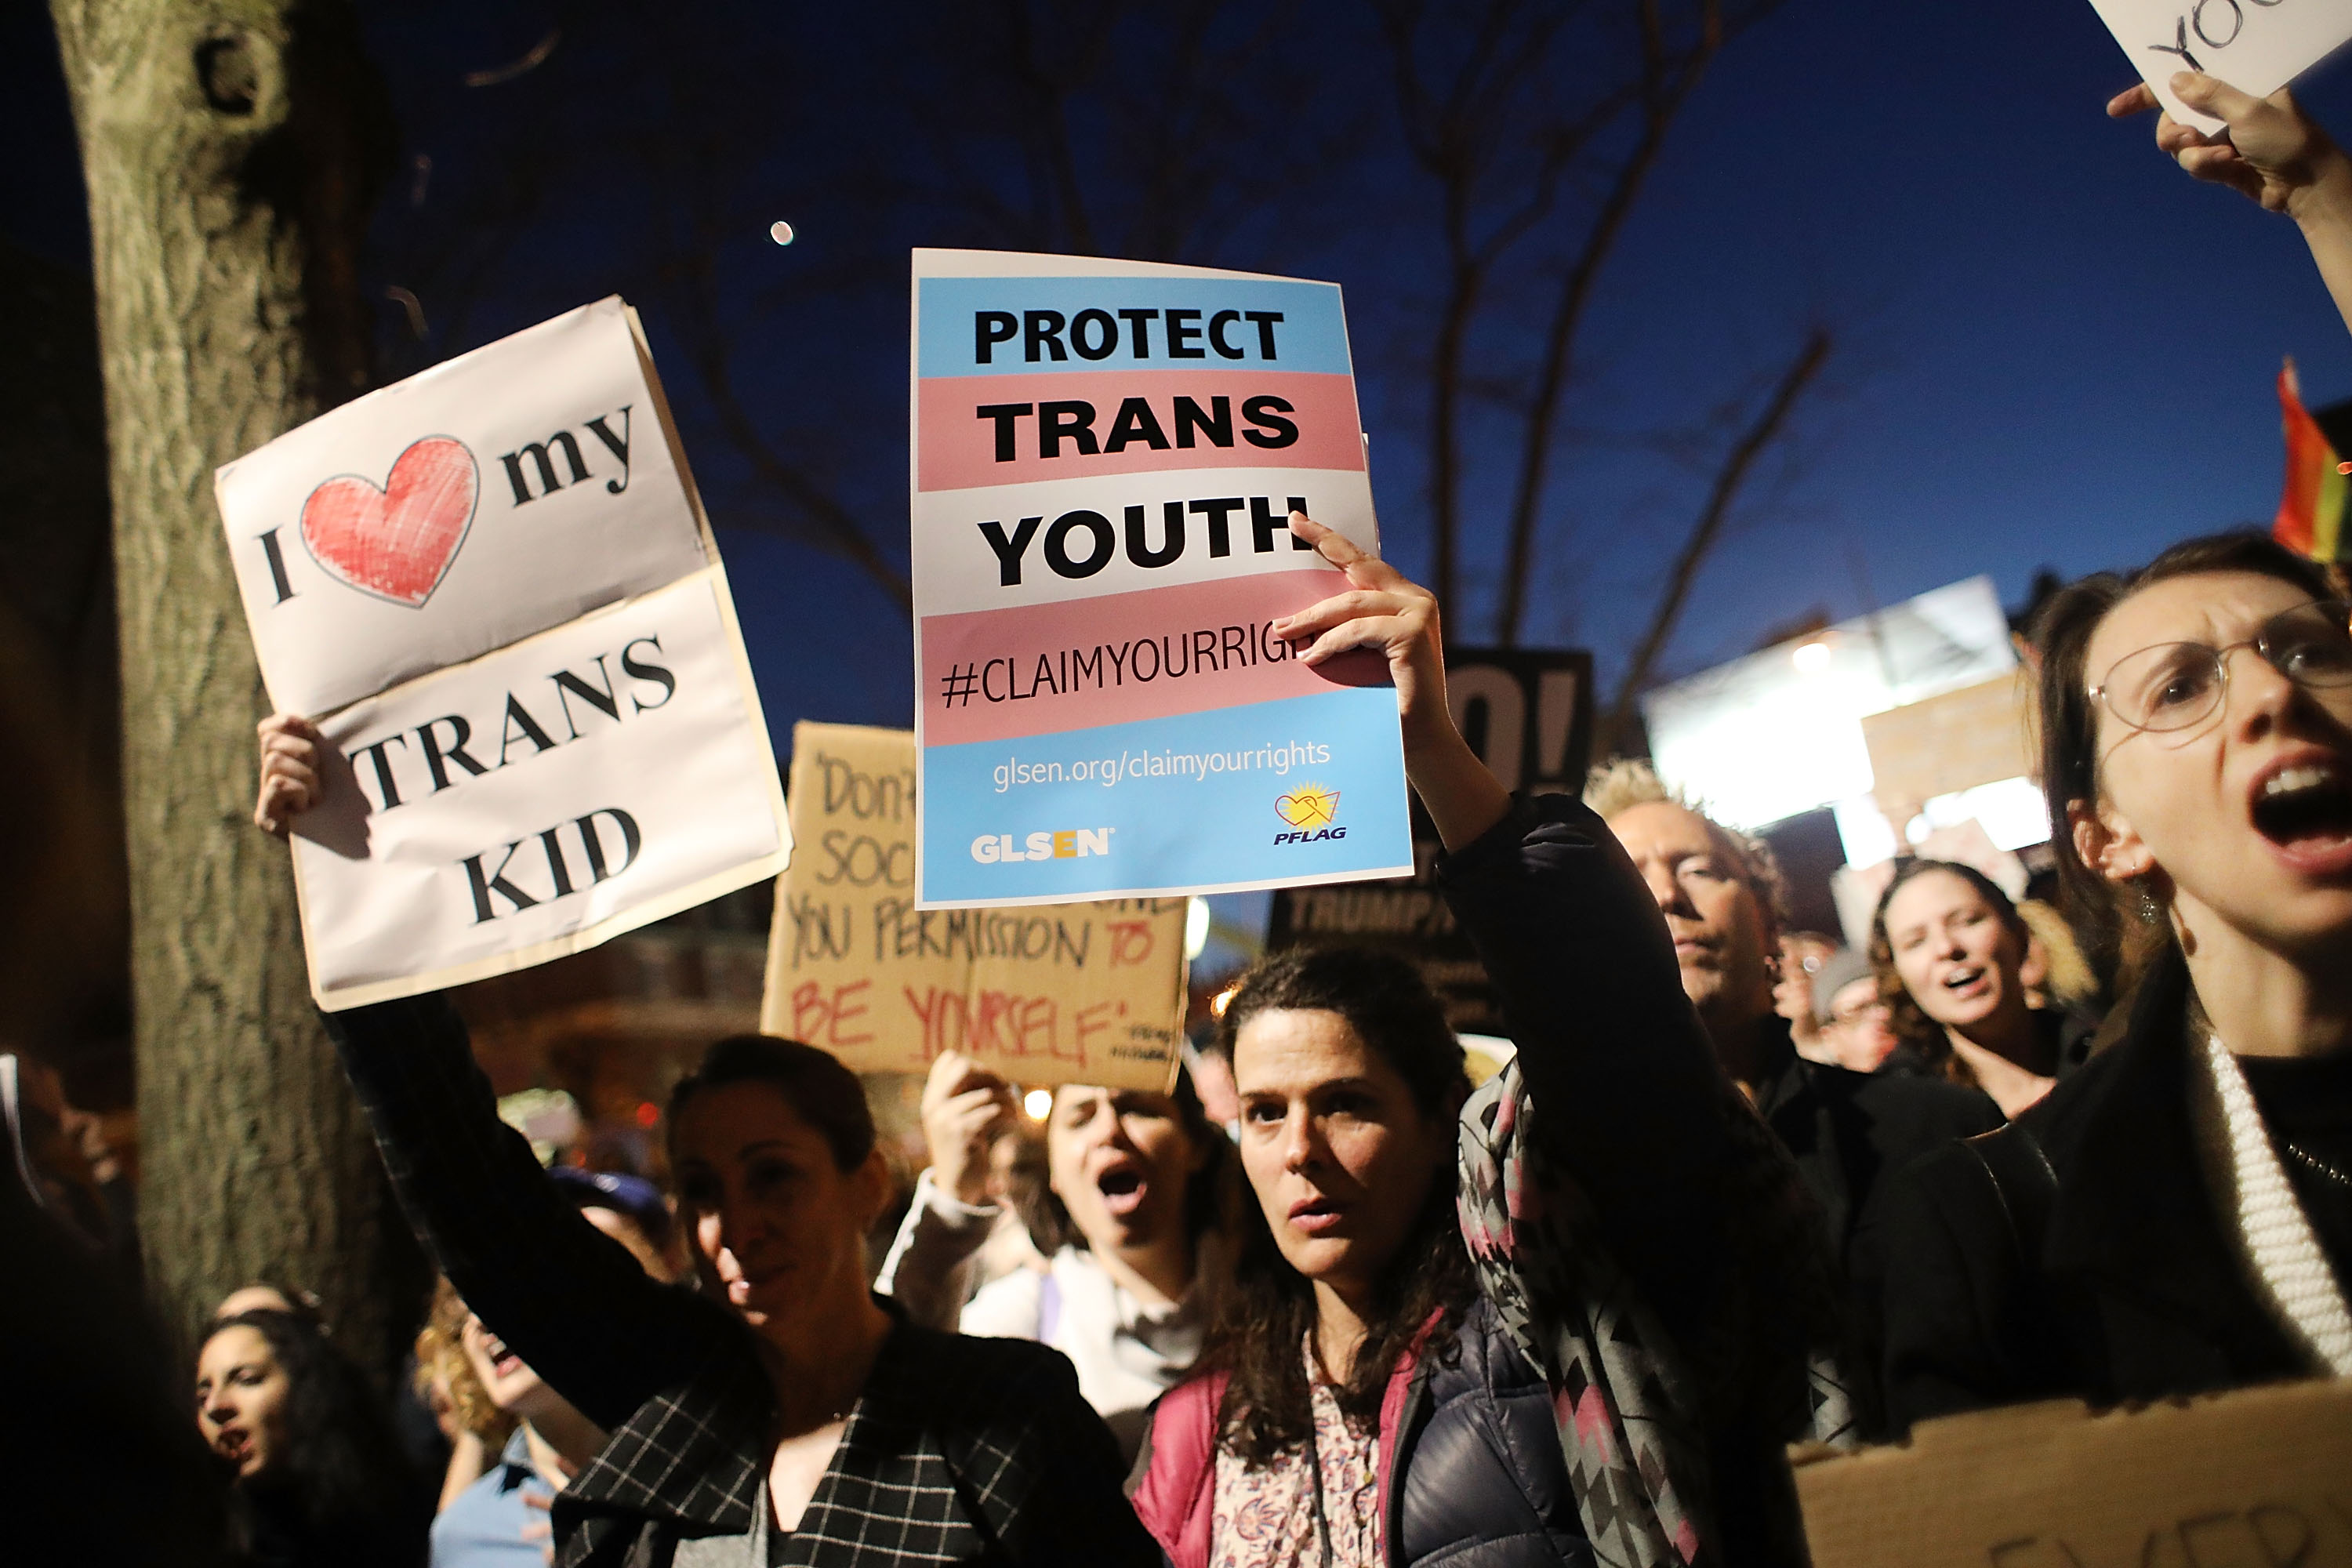 Protesters hold signs that read “I heart my trans kid” and “Protect trans youth.”